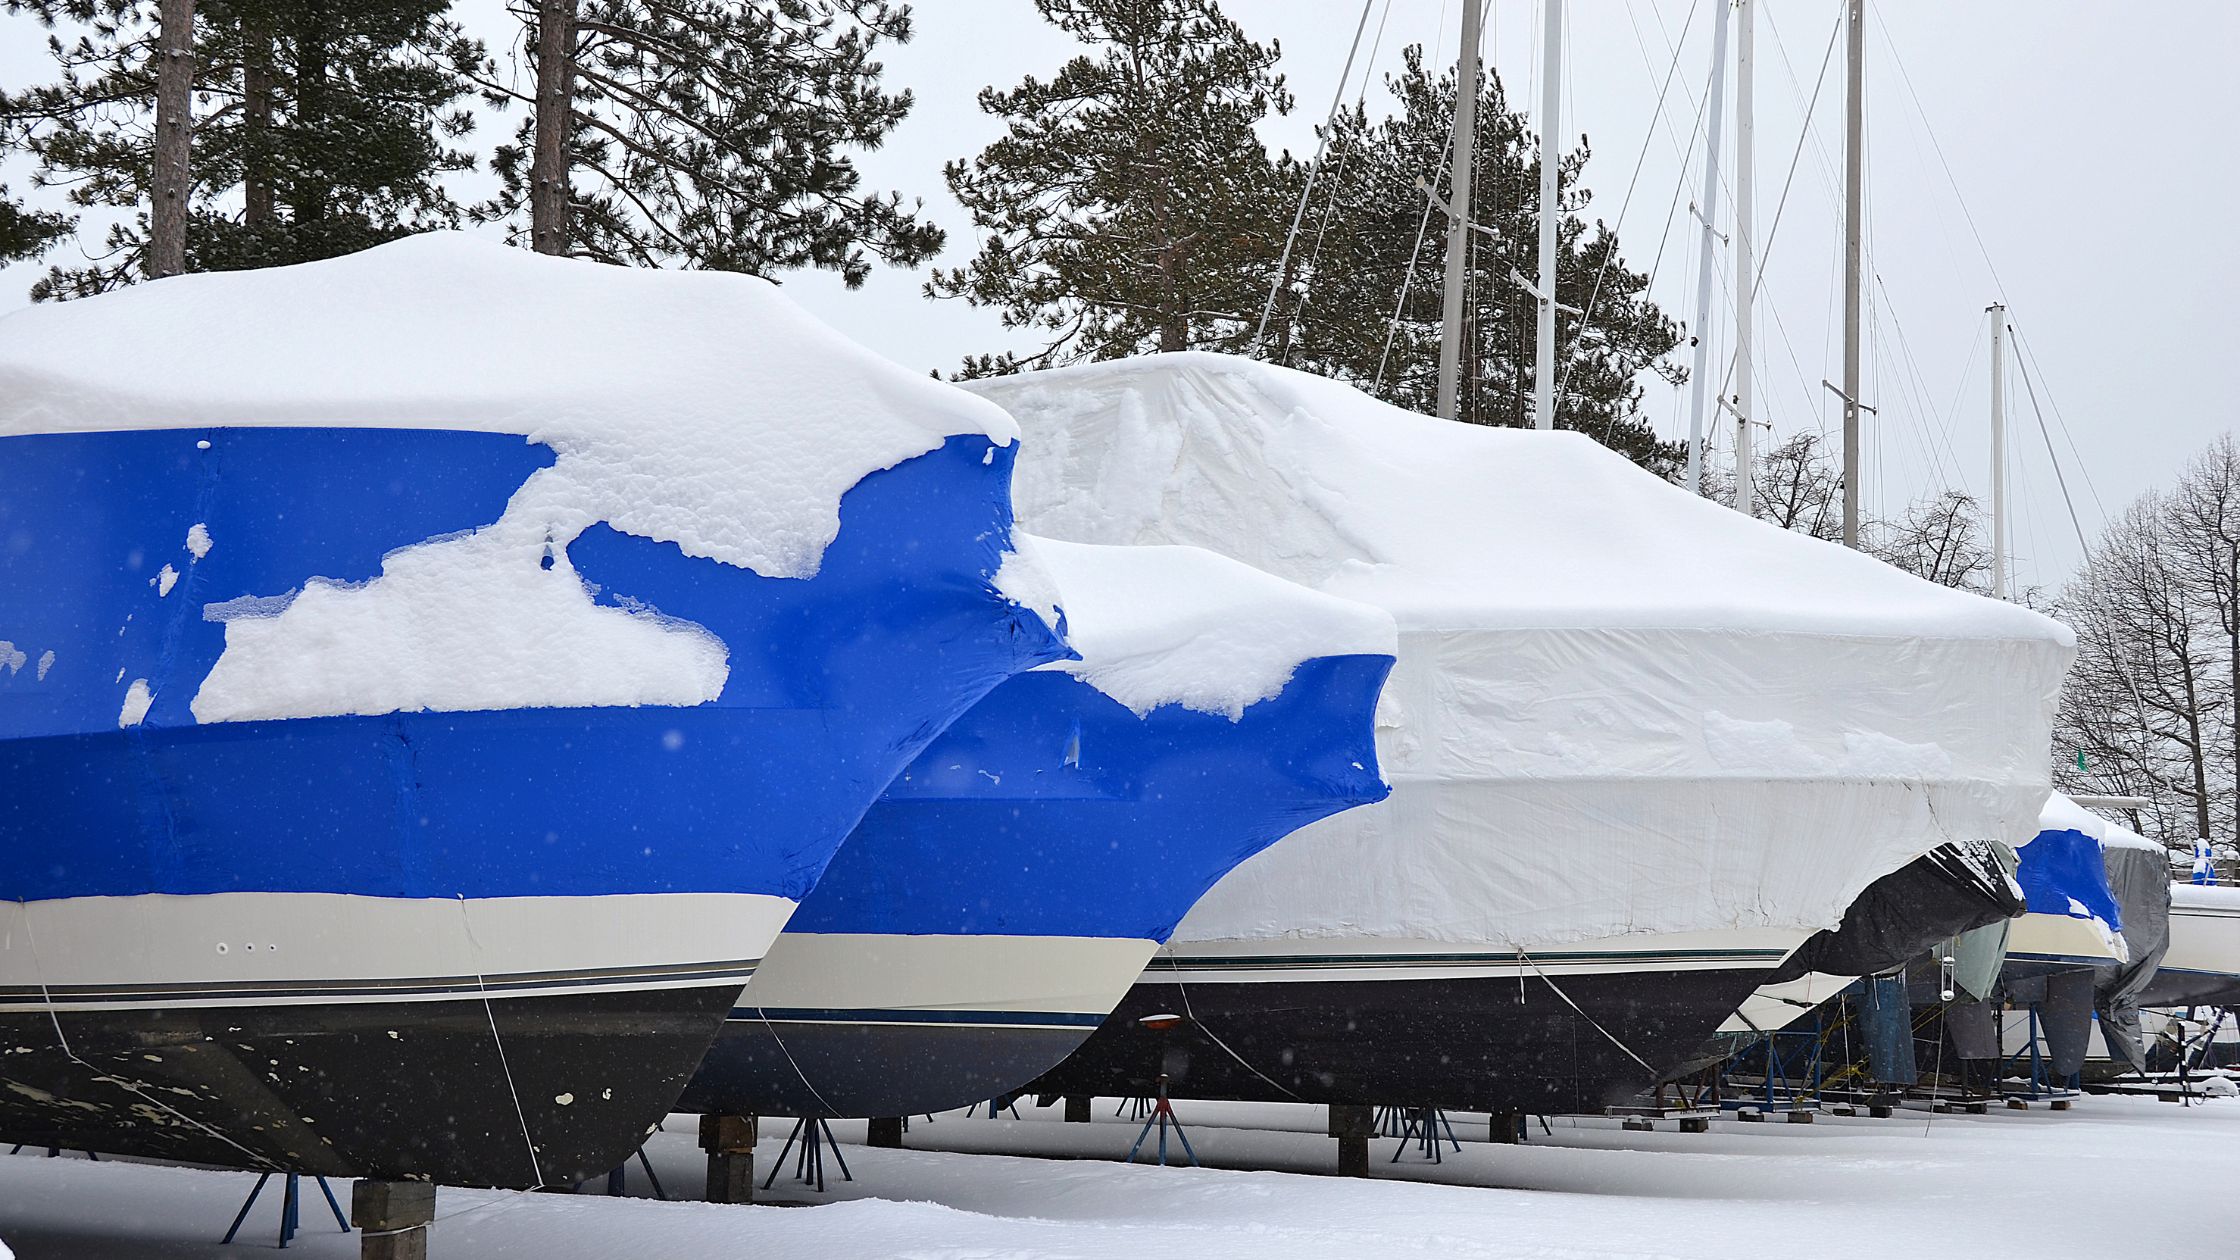 Prepping your boat for winter